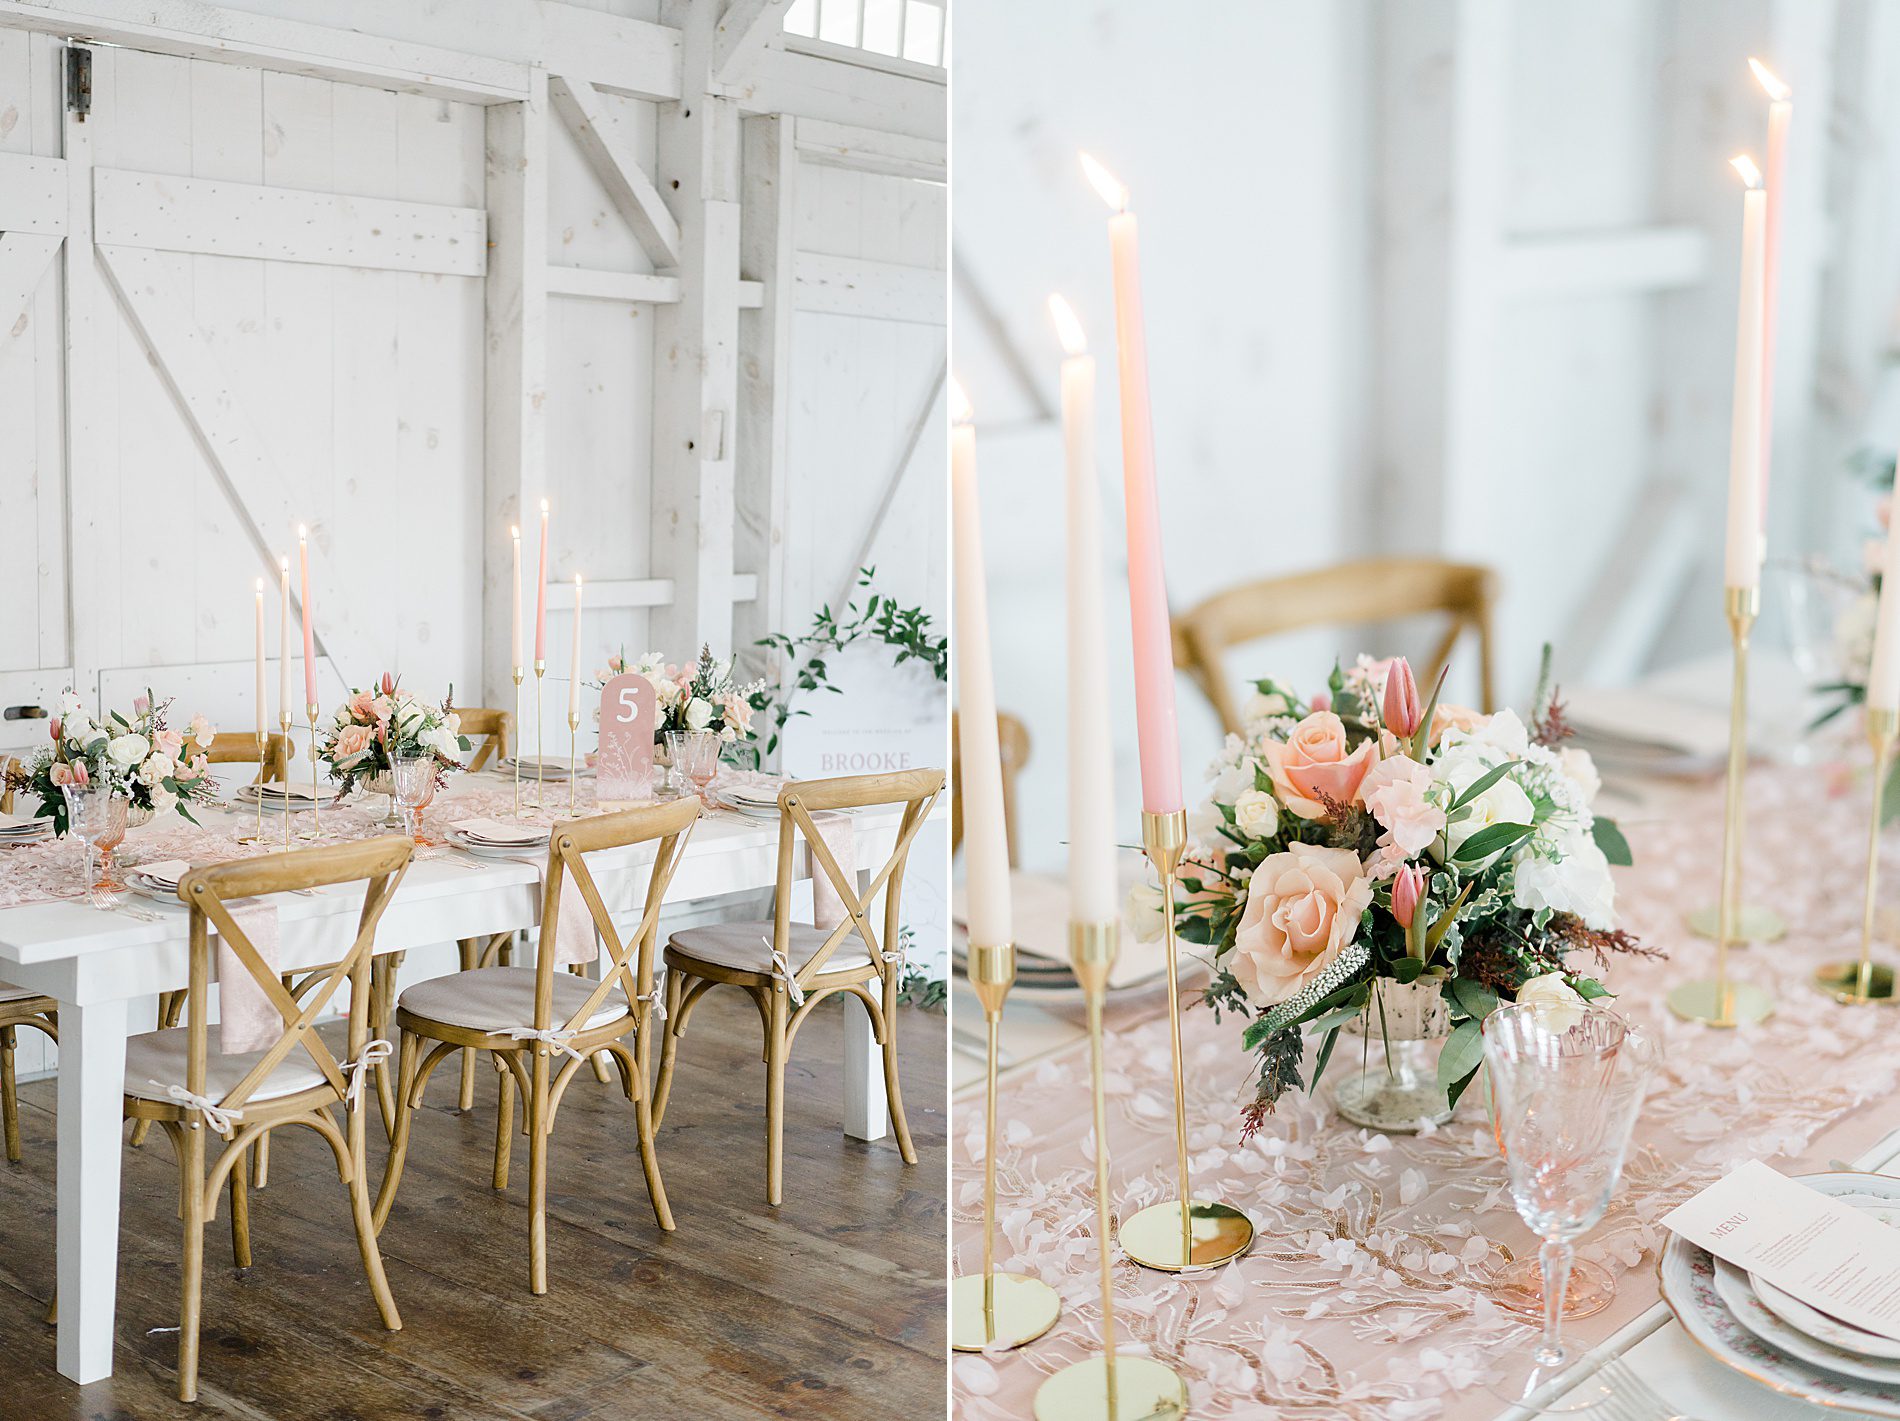 romantic and elegant wedding details from Boathouse Chapel at Bonnet Island Styled Wedding Shoot